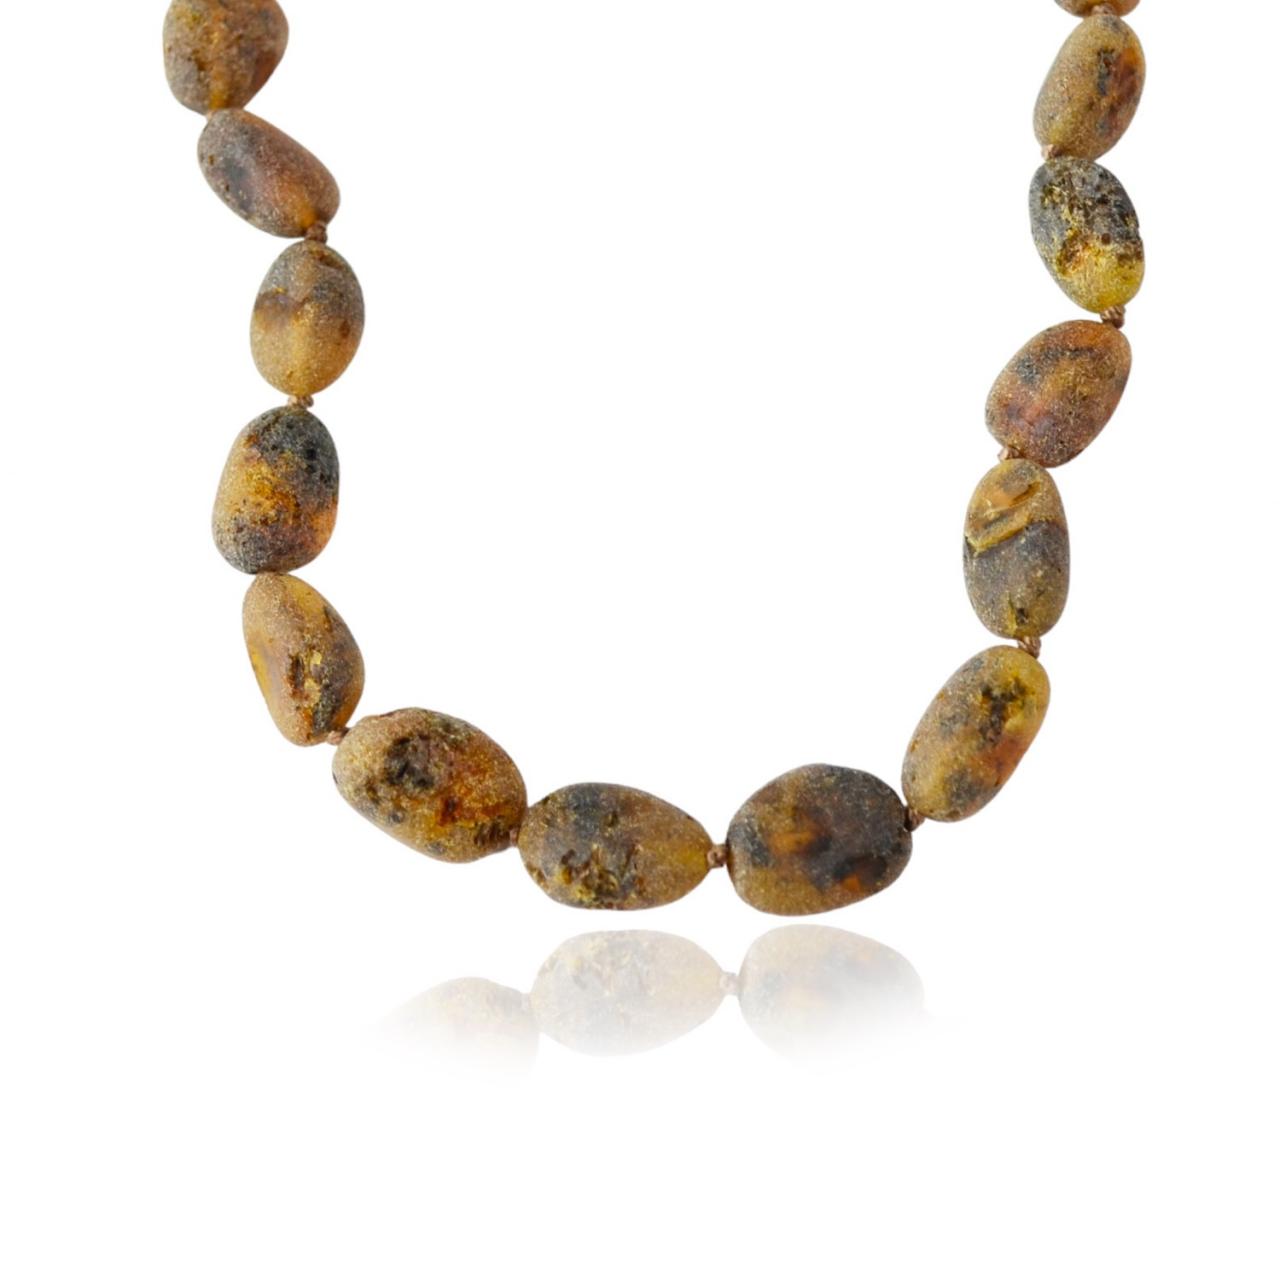 Green Raw Natural Baltic Amber Neklace For Adults: For Men Or Women. High Quality Of Amber. Dm76